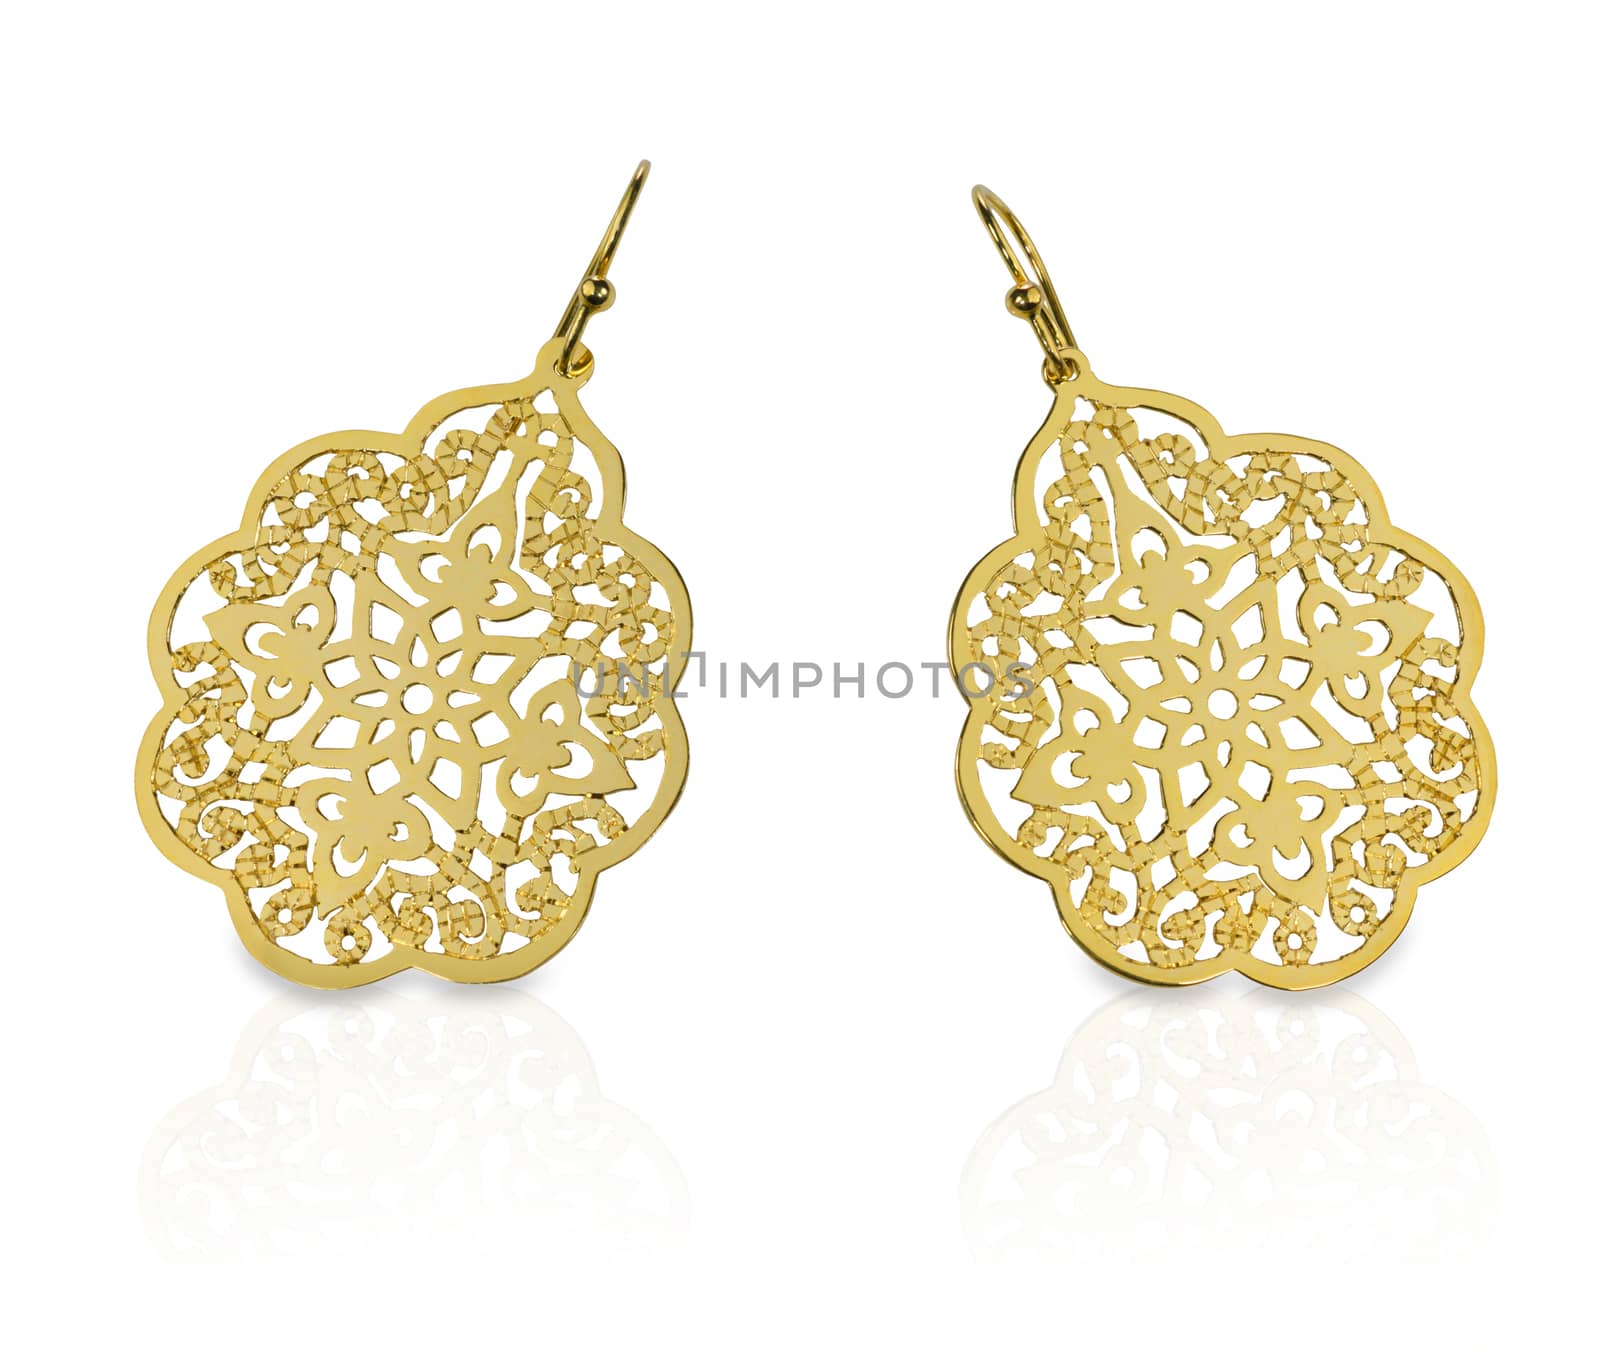 Elaborate Gold Filigree Dangle Earrings Isolated on a white background with reflection